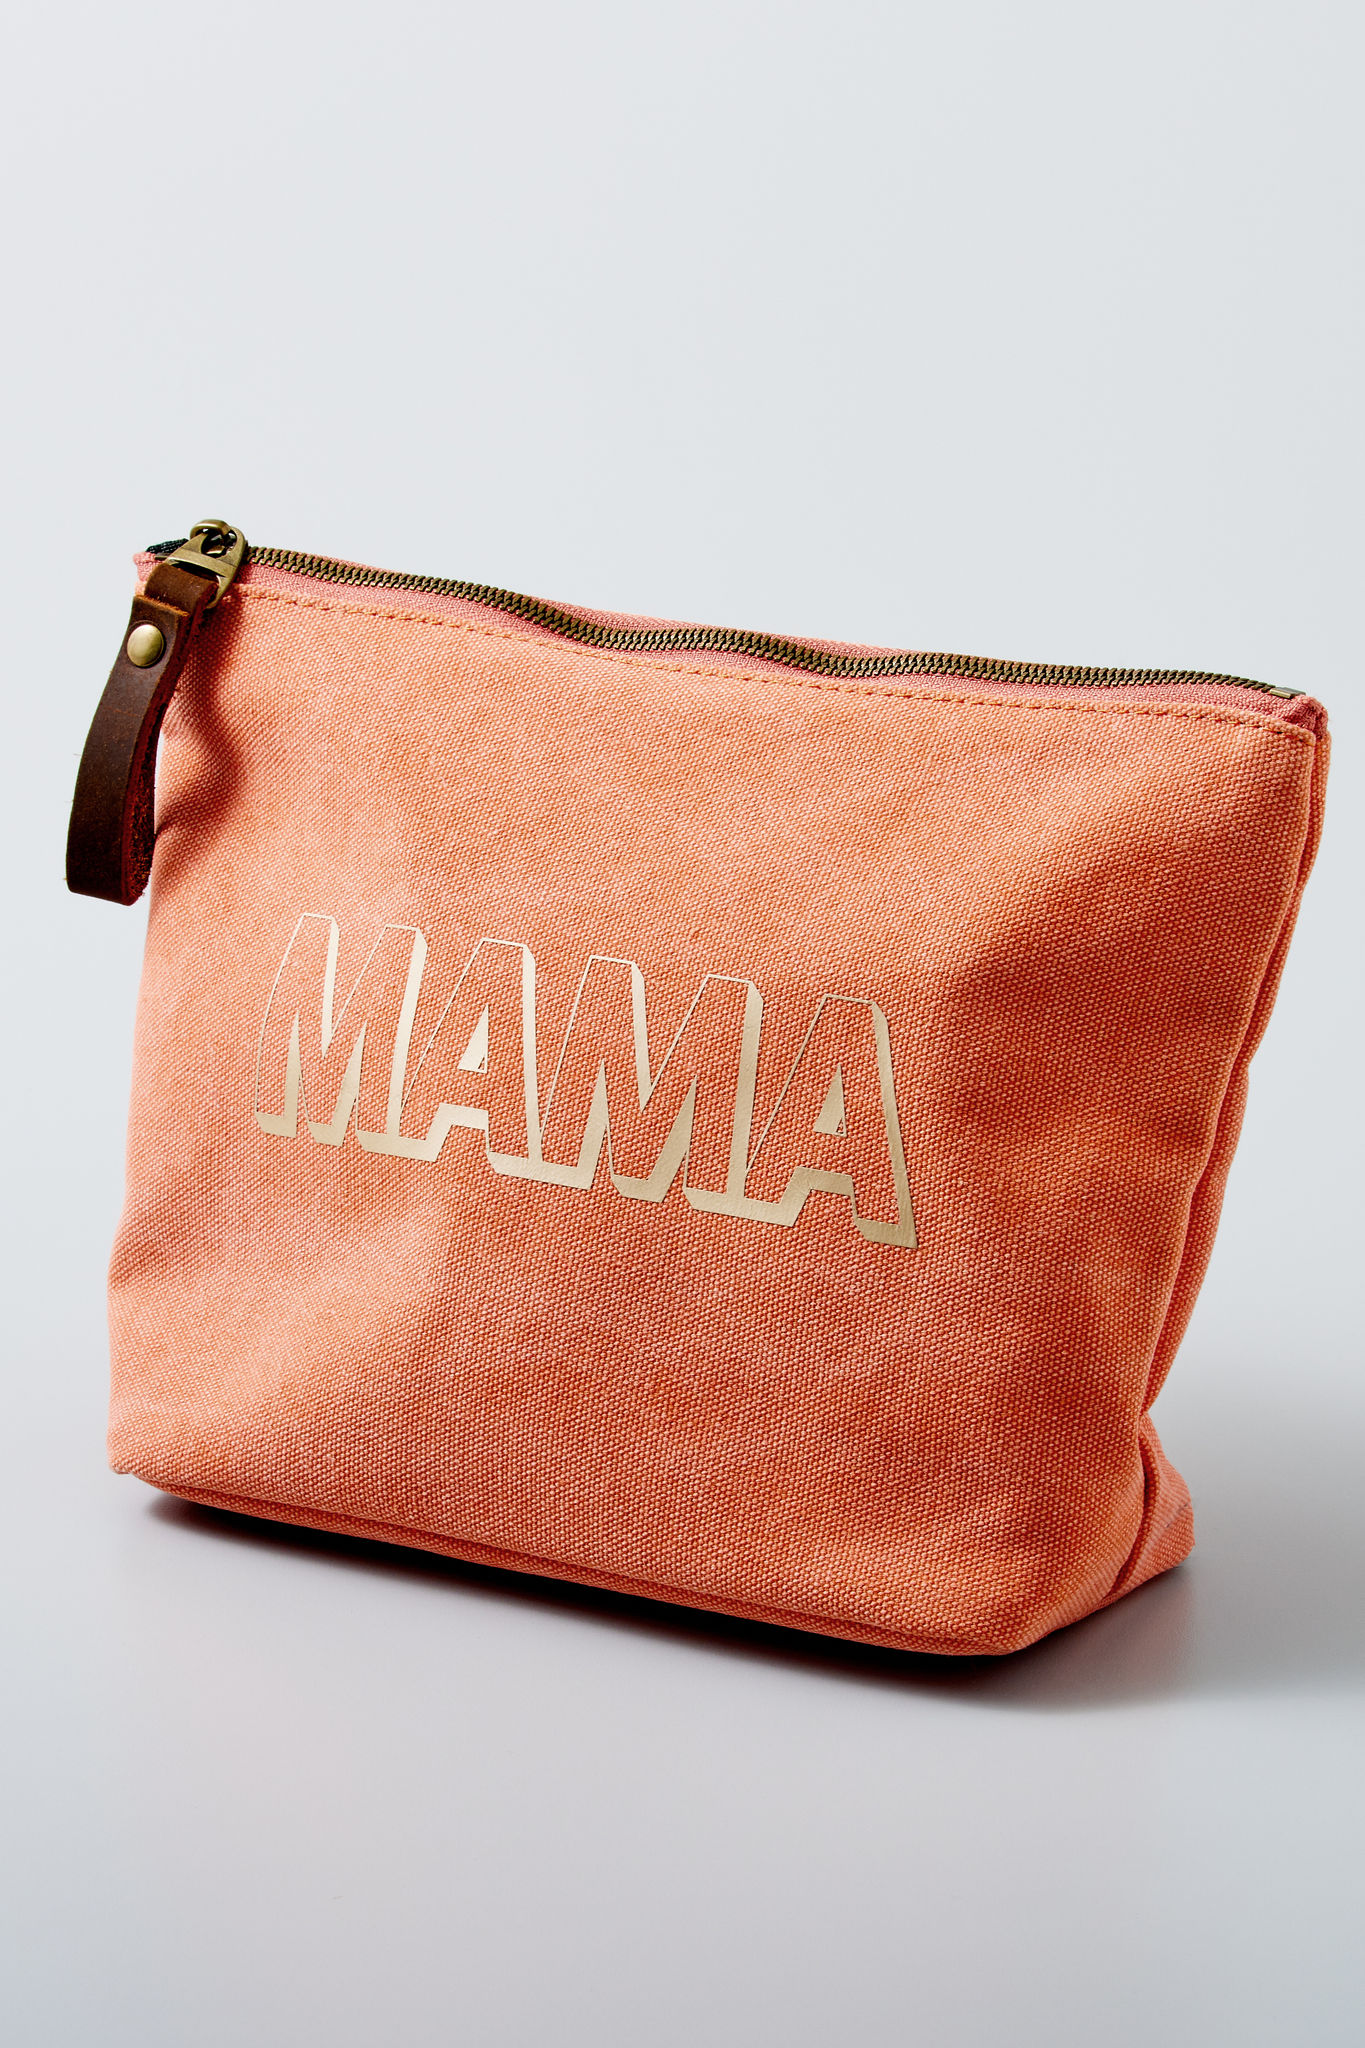 Iron on project to create a mama cosmetic bag